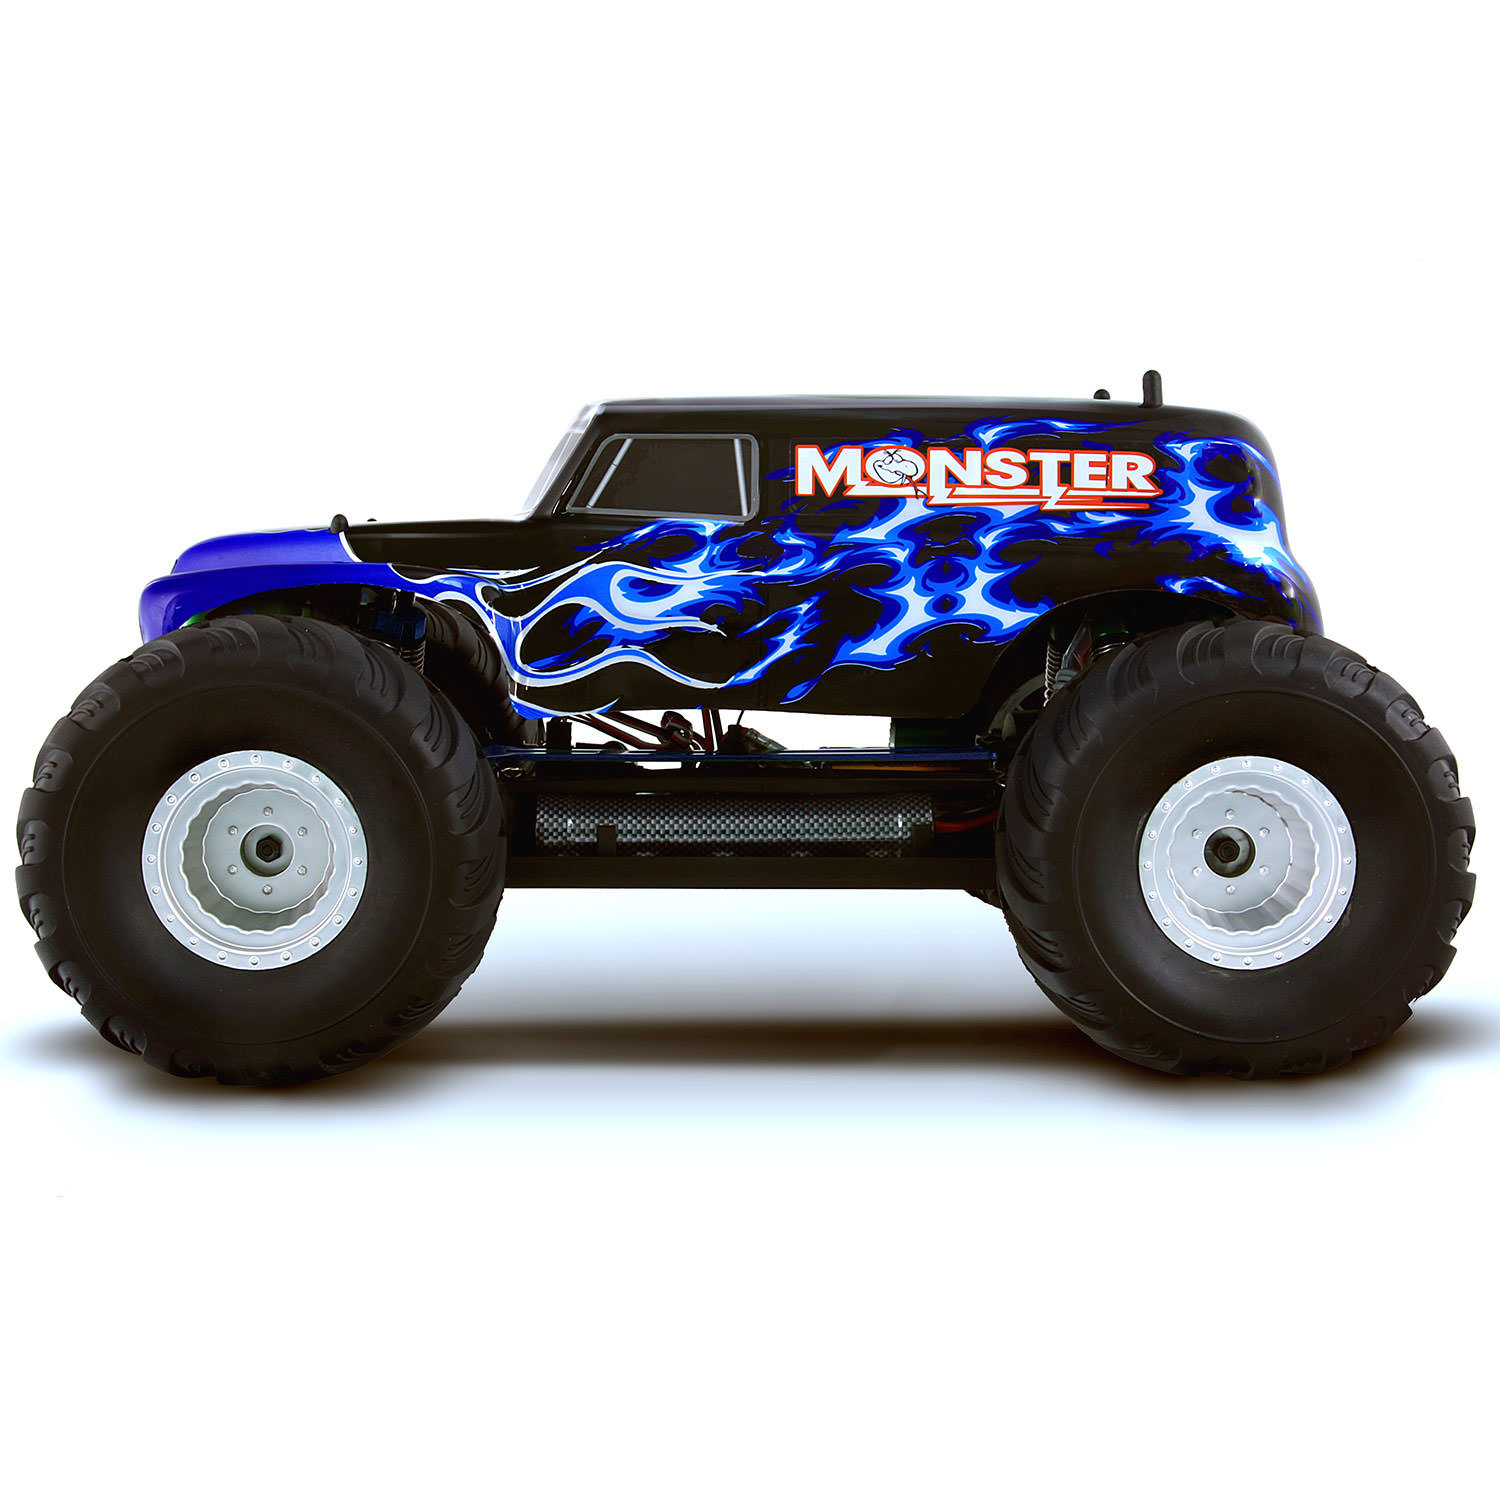 HSP Monster Truck Special Edition Blue RC Truck at Hobby Warehouse